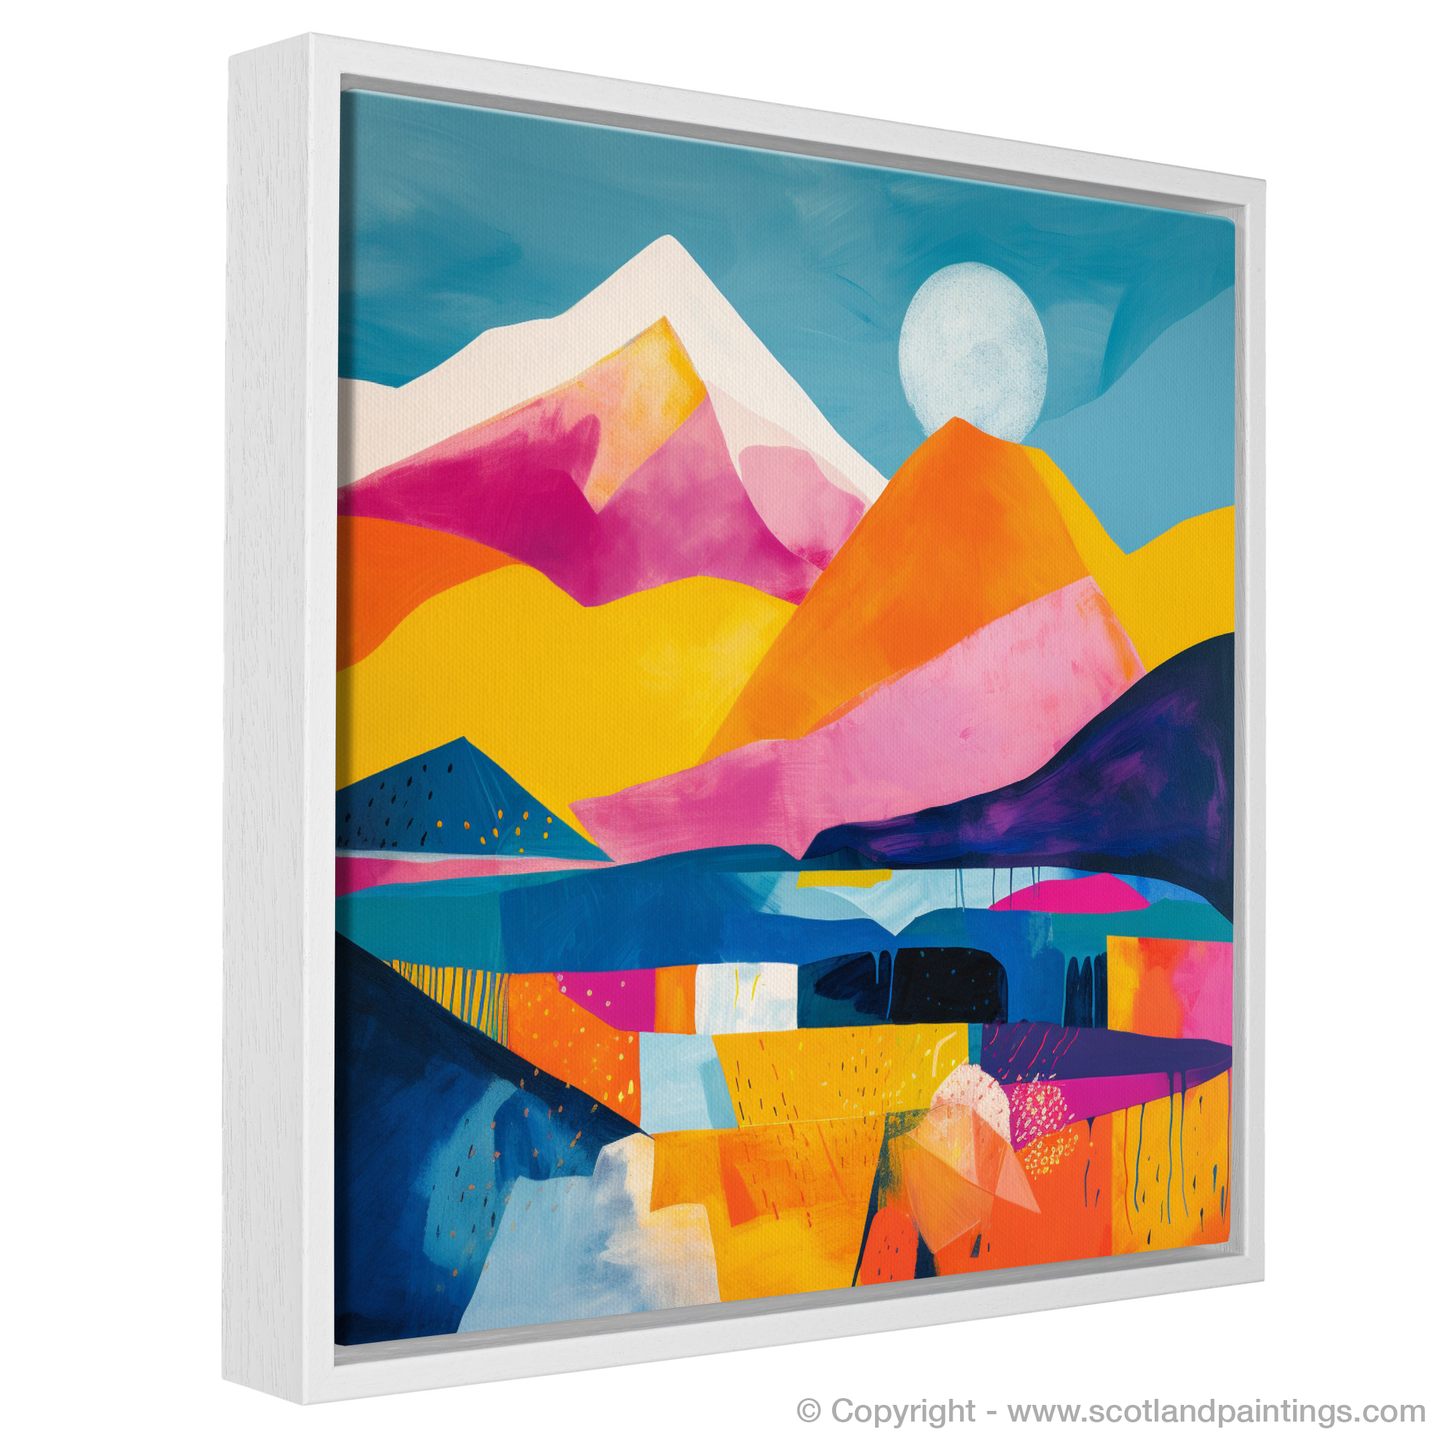 Painting and Art Print of Ben Nevis entitled "Abstract Majesty of Ben Nevis".